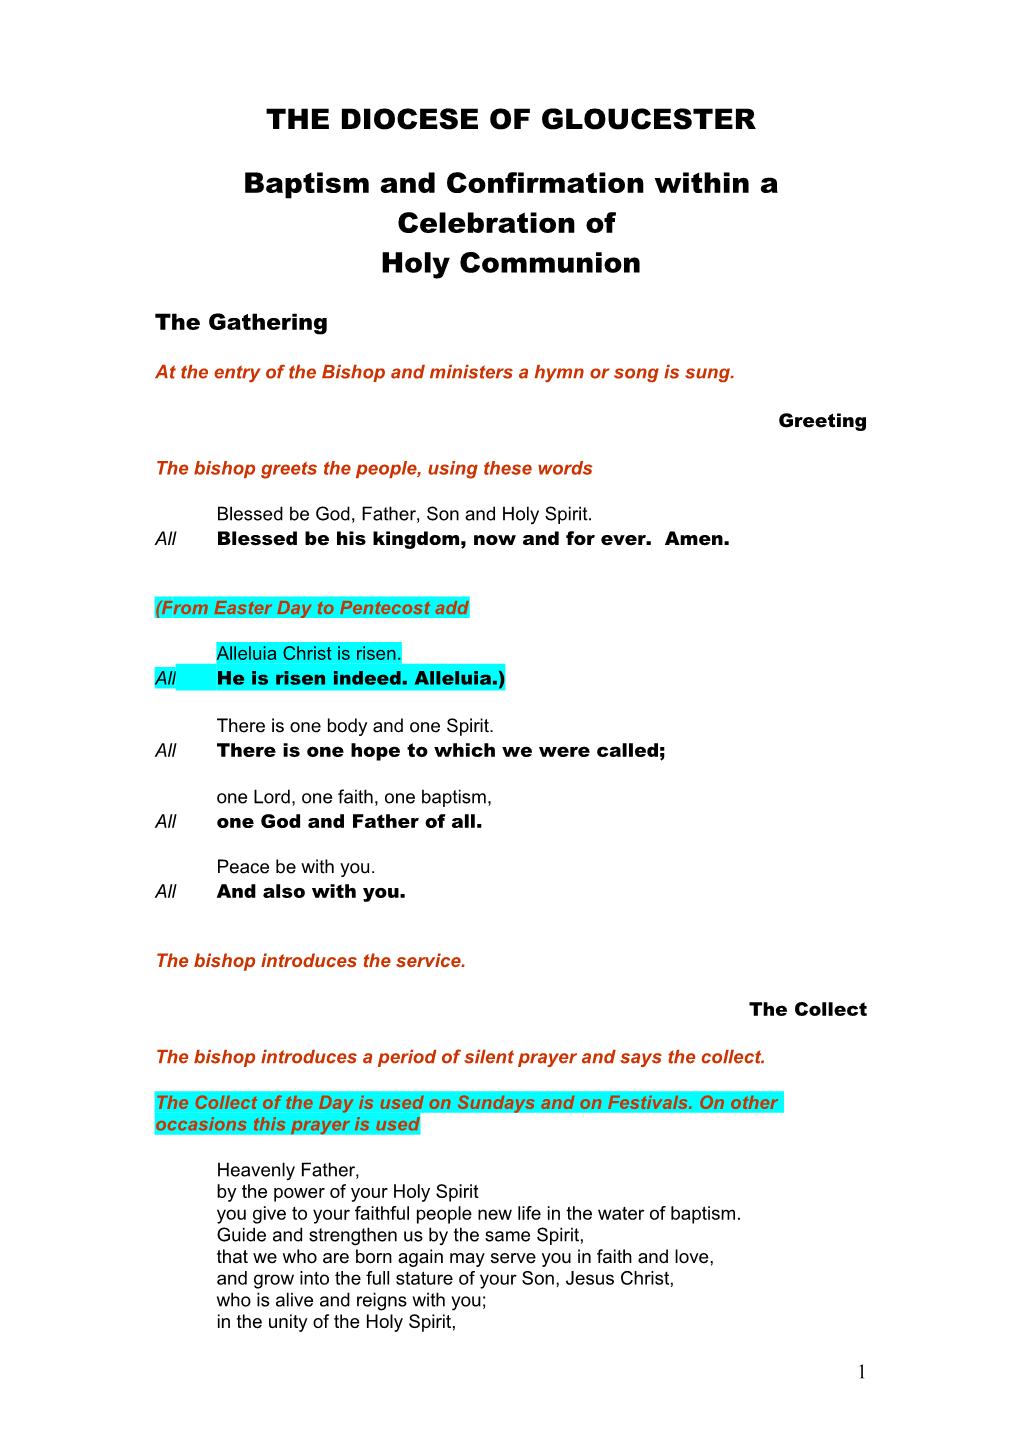 Baptism and Confirmation at the Order for Celebration of Holy Communion